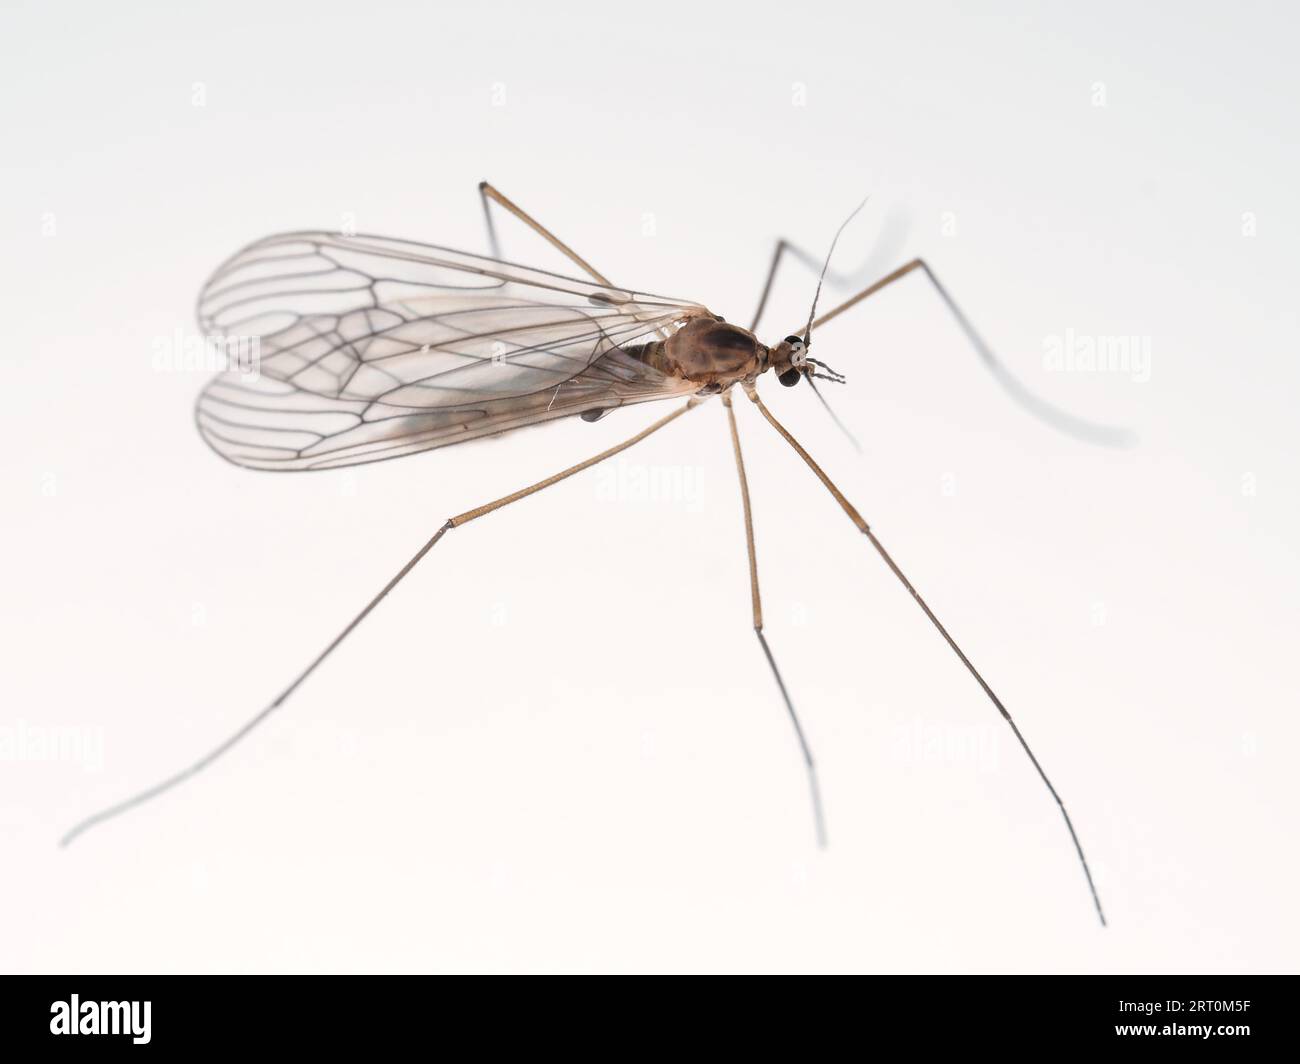 Small winter crane fly identified as Trichocera sp. (likely Winter Gnat -  Trichocera annulata)  in Washington state, USA - insect macro photography Stock Photo